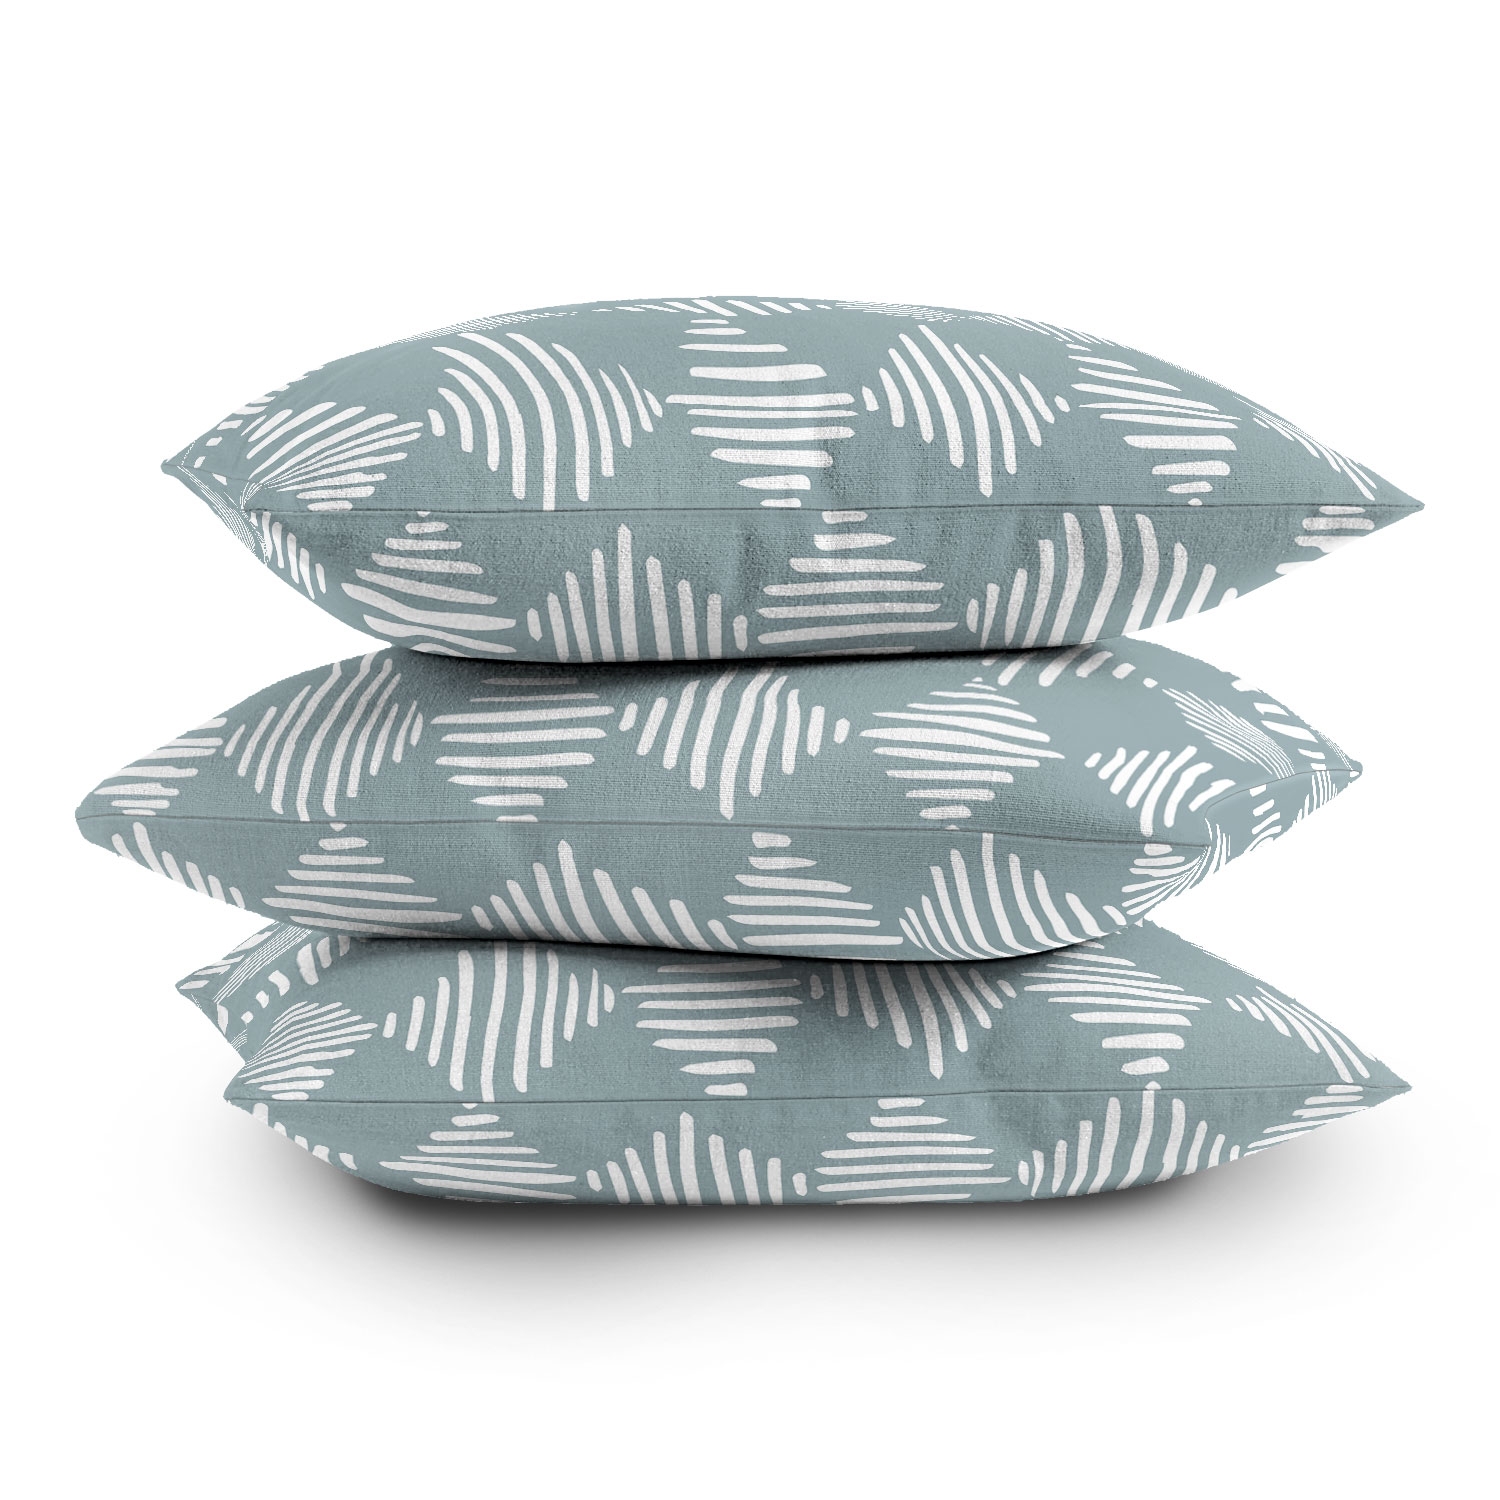 Sketches 1 by Mareike Boehmer - Outdoor Throw Pillow 16" x 16" - Image 1